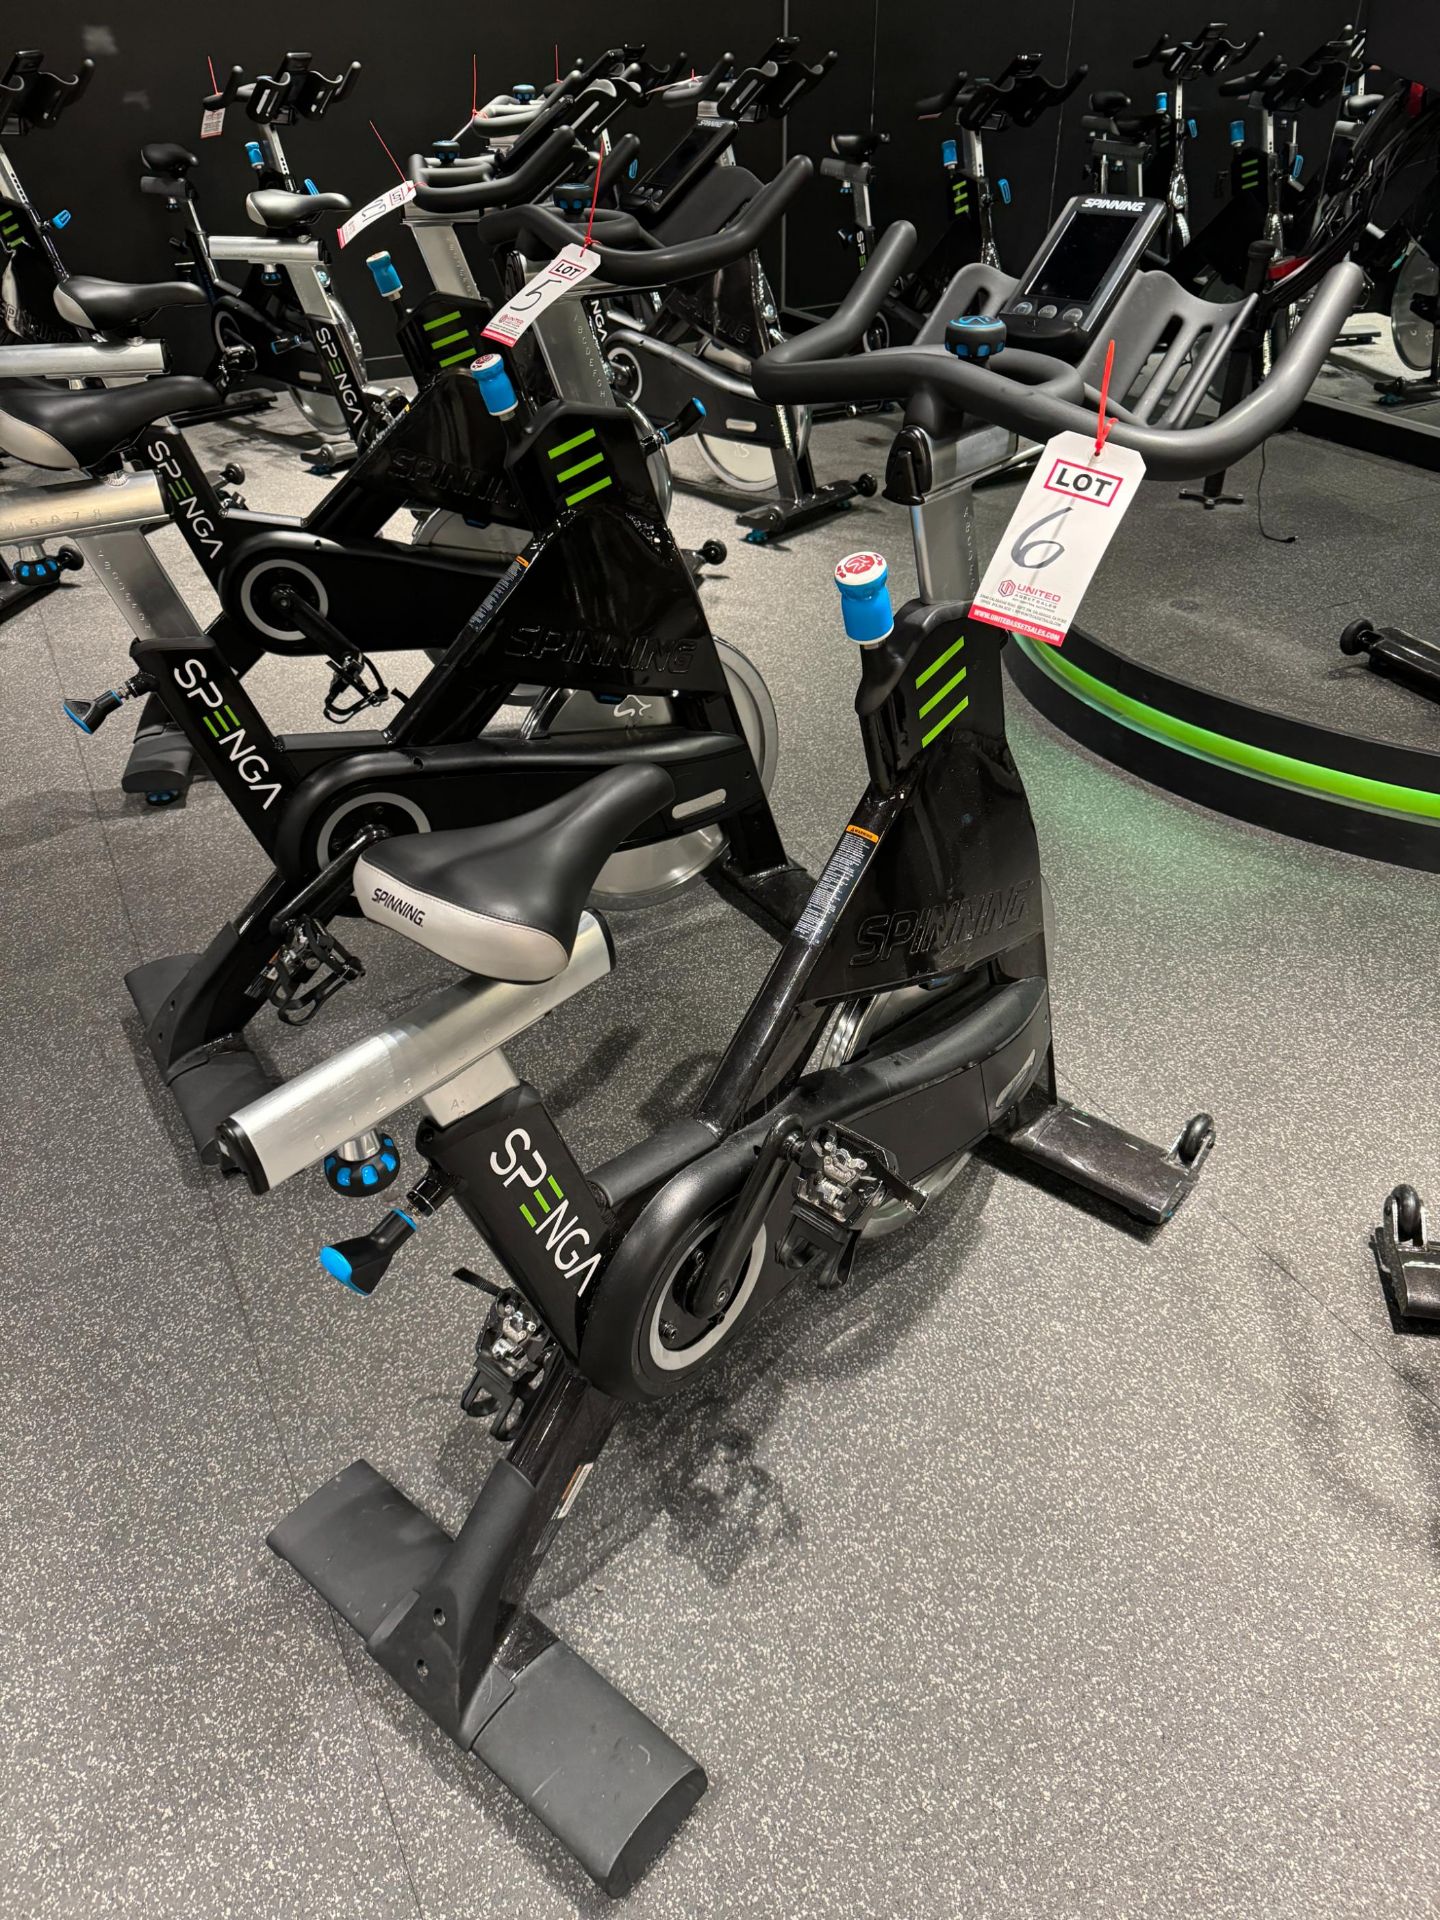 PRECOR SBK 869 SPINNER CHRONO POWER BIKE, W/ CONSOLE, S/N AC97I20190257, (NOTE: SOLD SUBJECT TO BULK